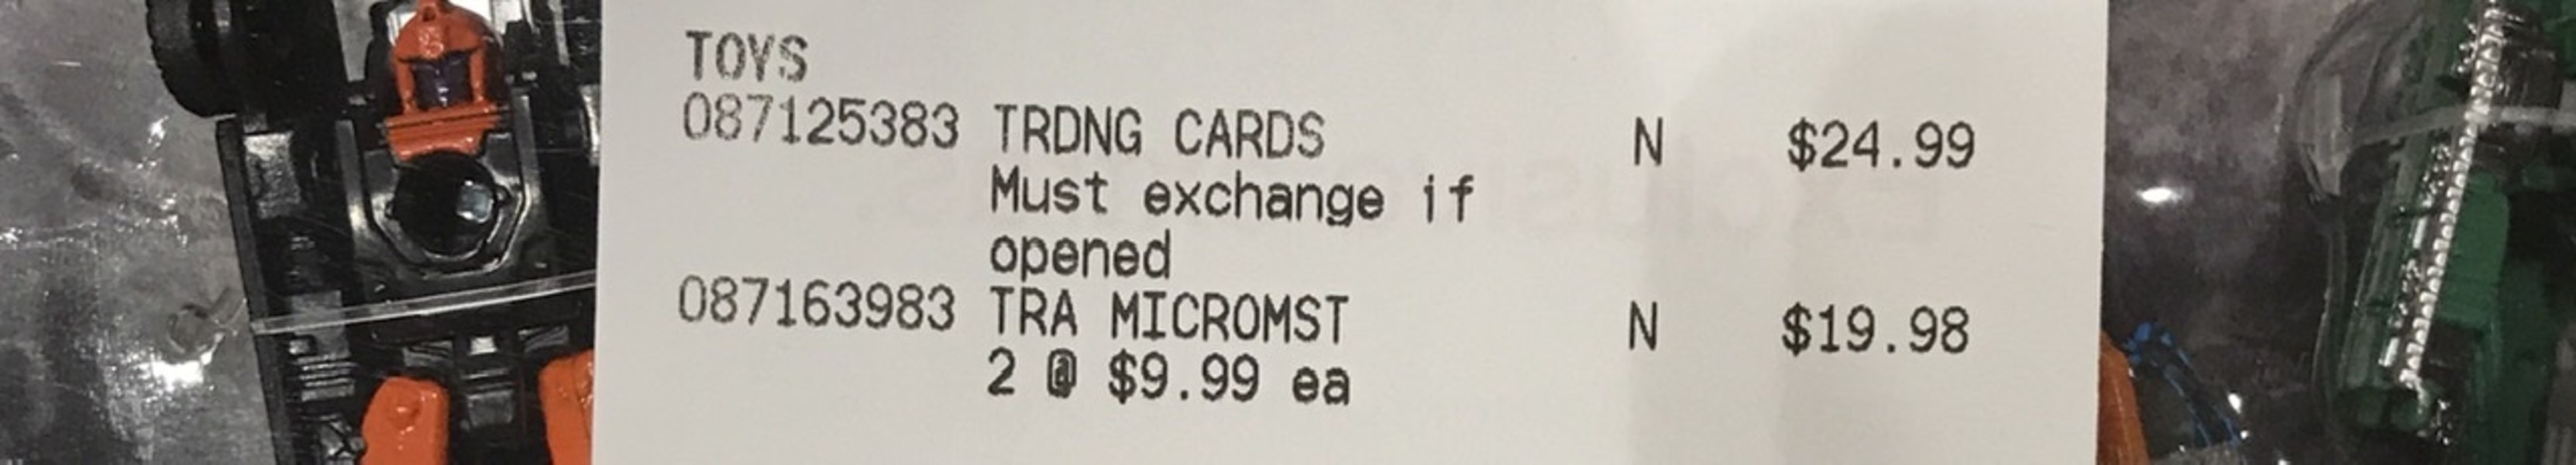 Transformers Earthrise First US Sighting   Micromasters Found At Target  (2 of 2)